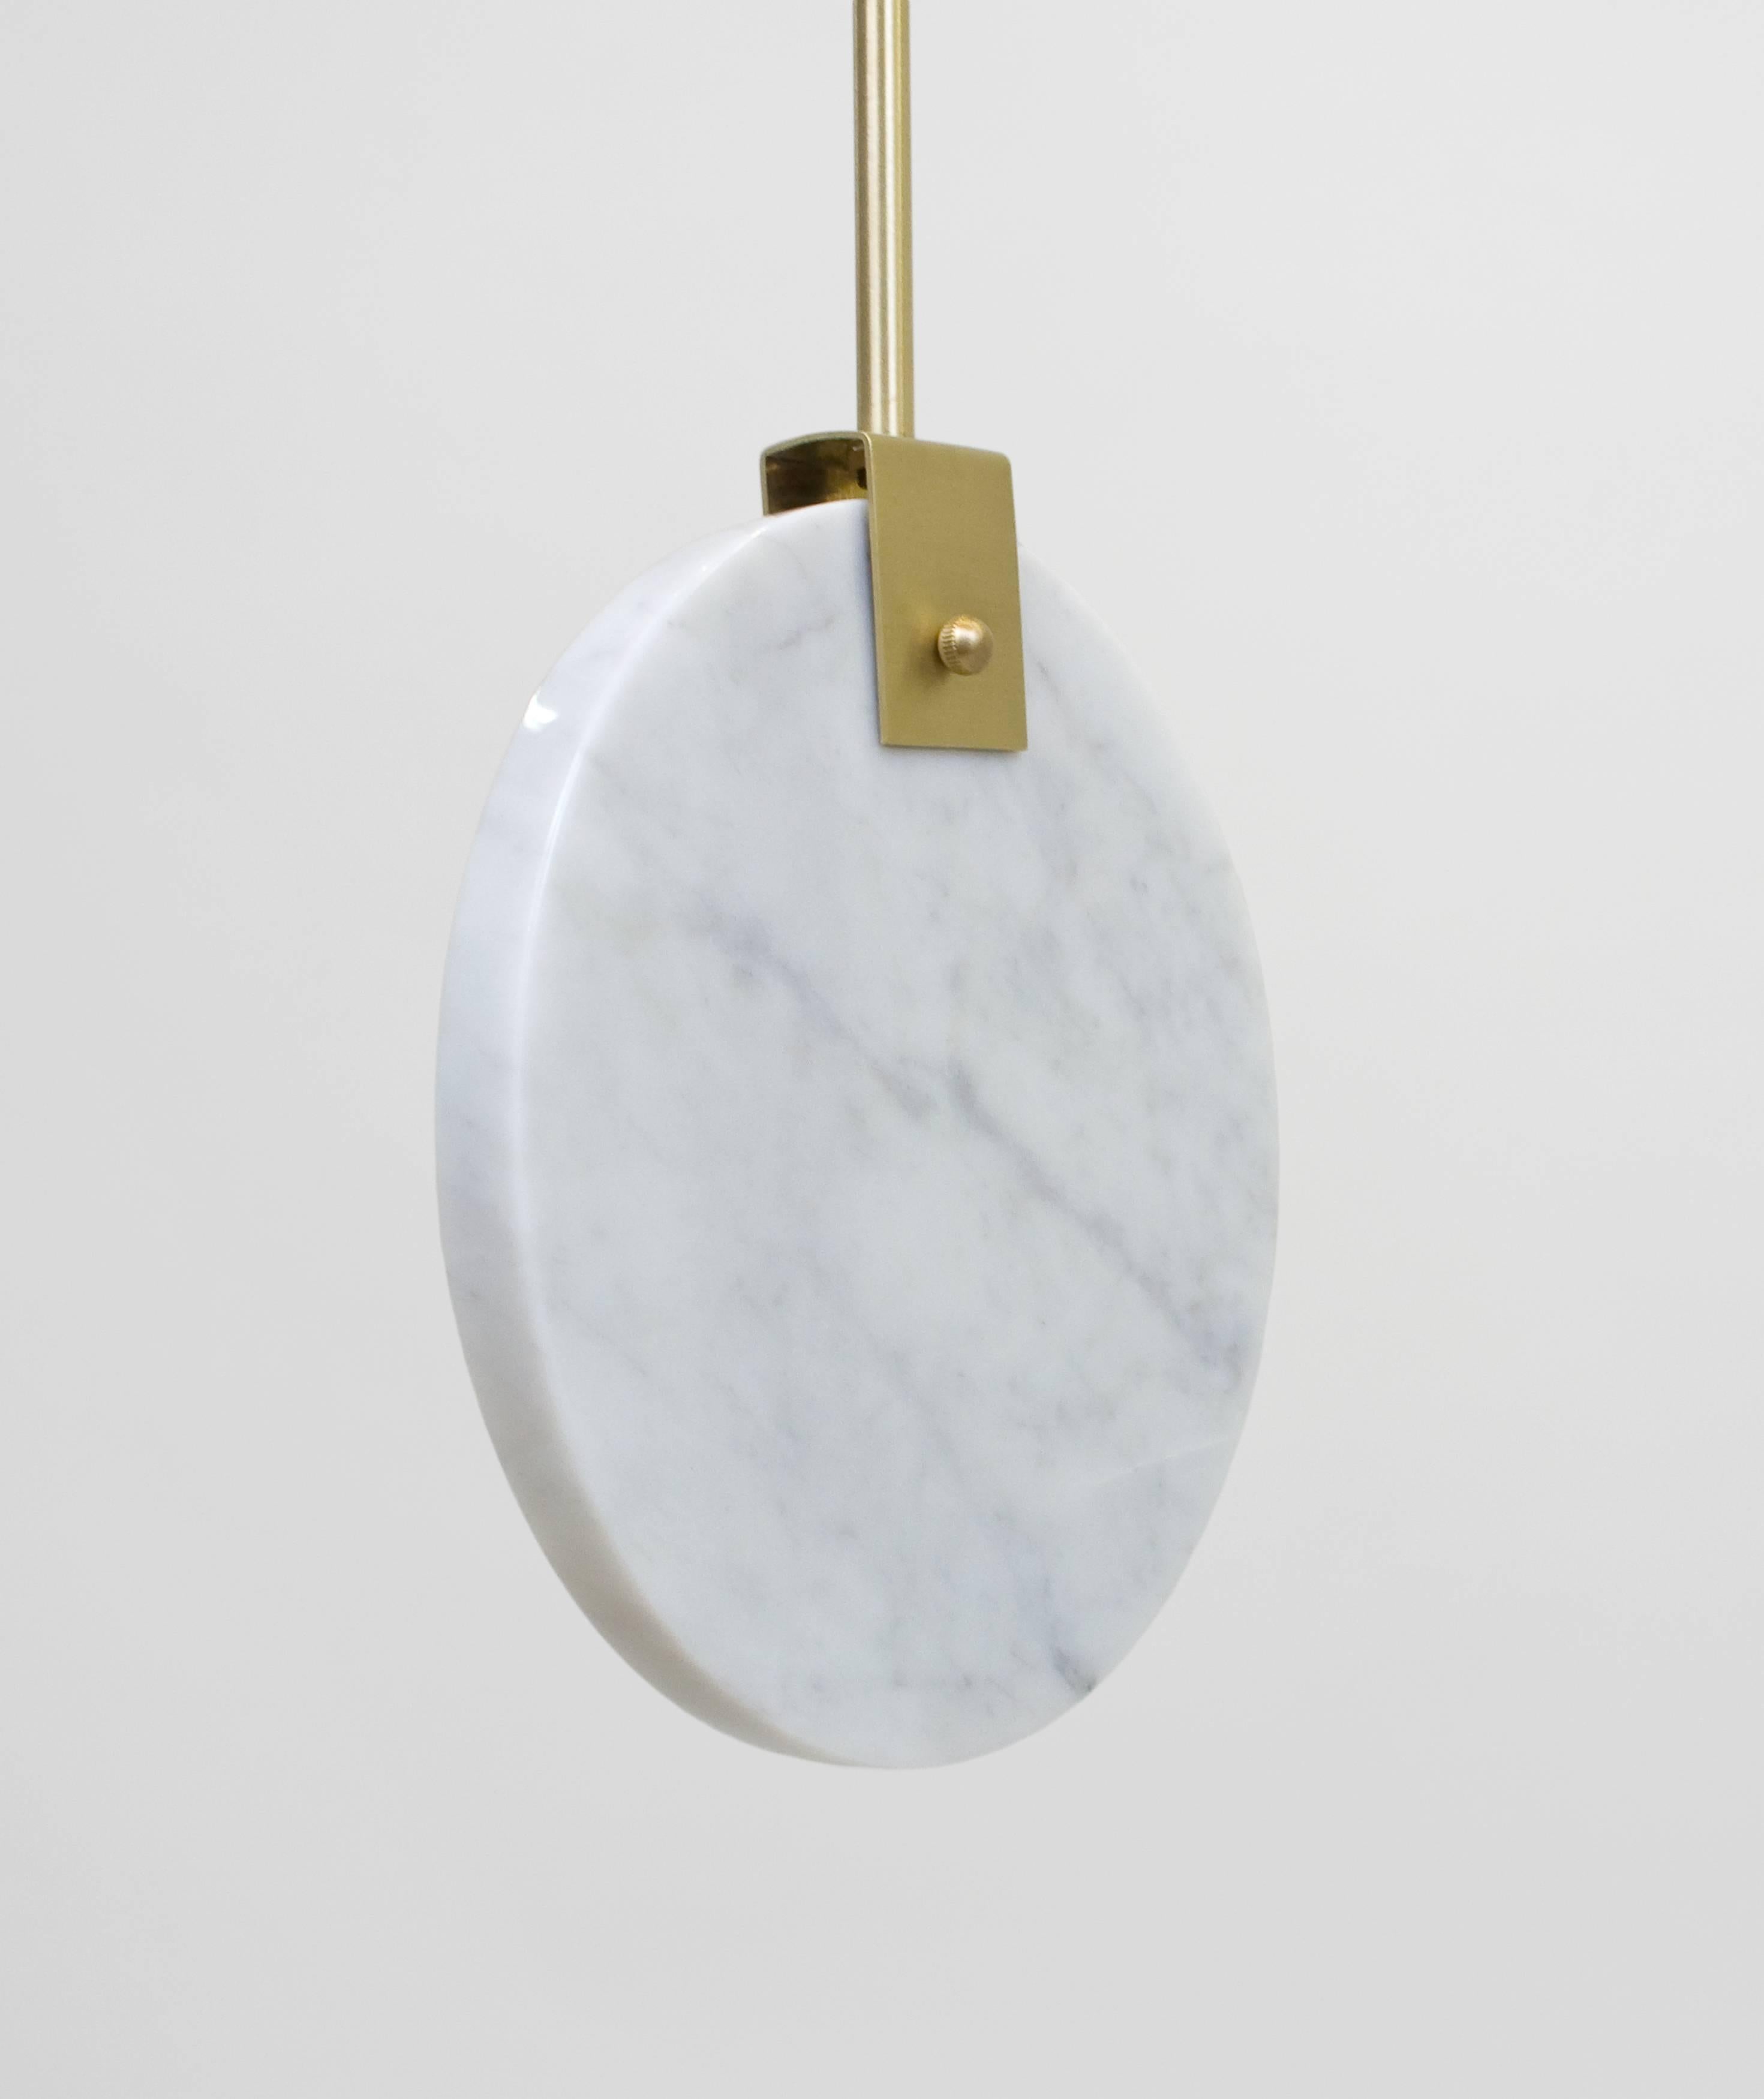 American Bec Brittain Helix Short Hanging Brass Led Lamp with Marble Counterweight For Sale